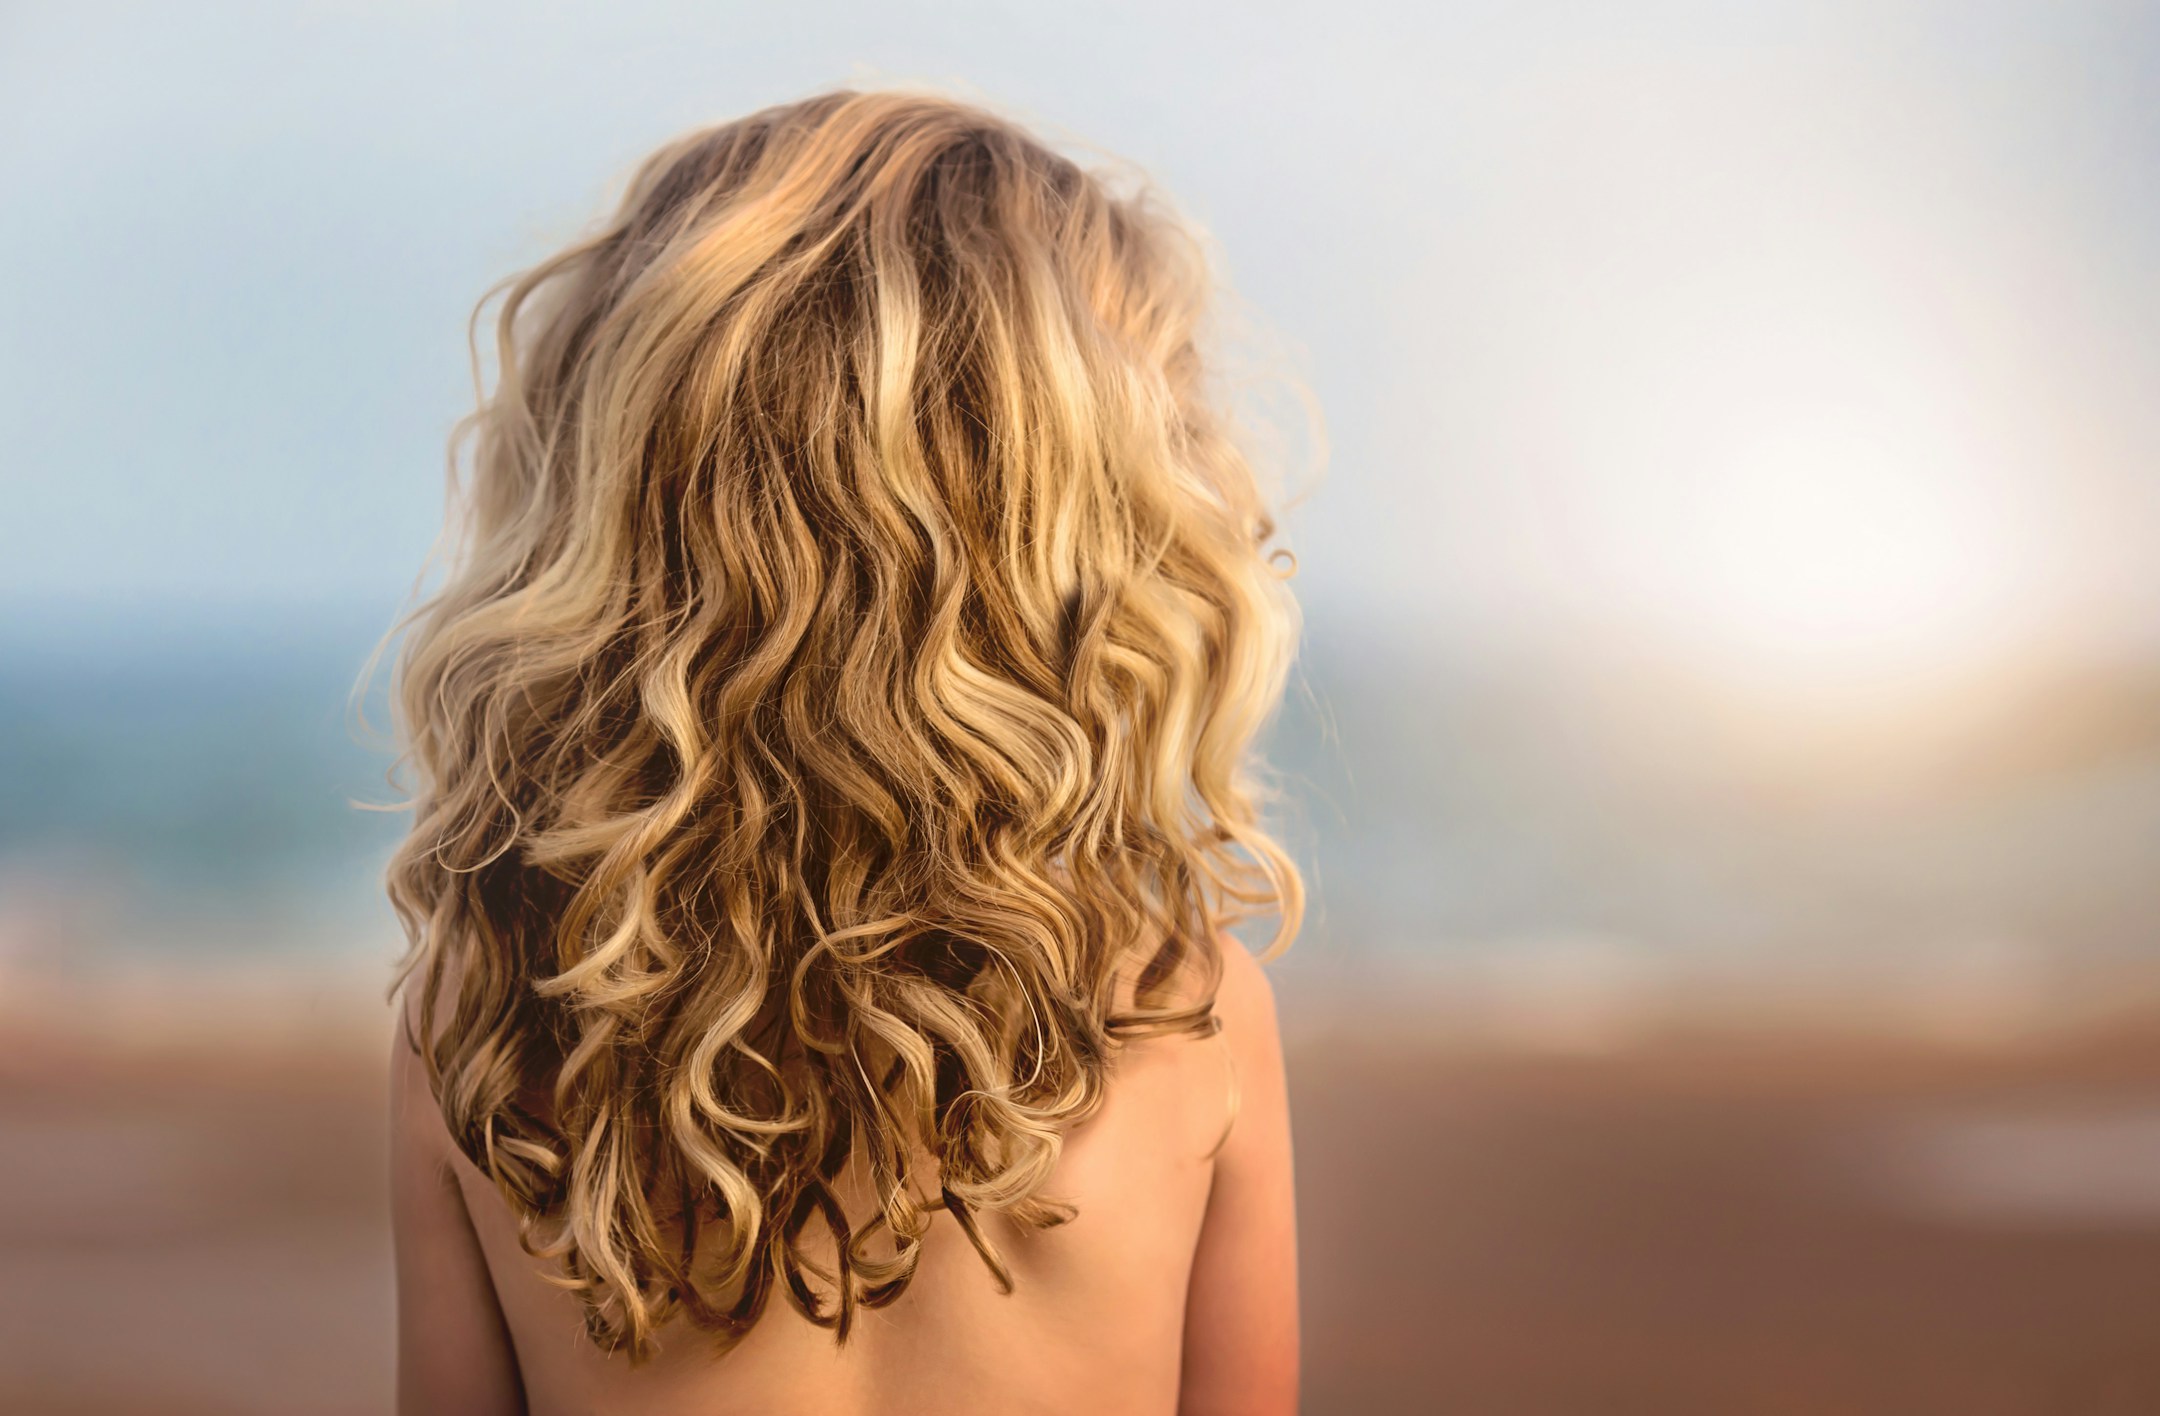 Natural Hacks To Curl Your Hair At Home